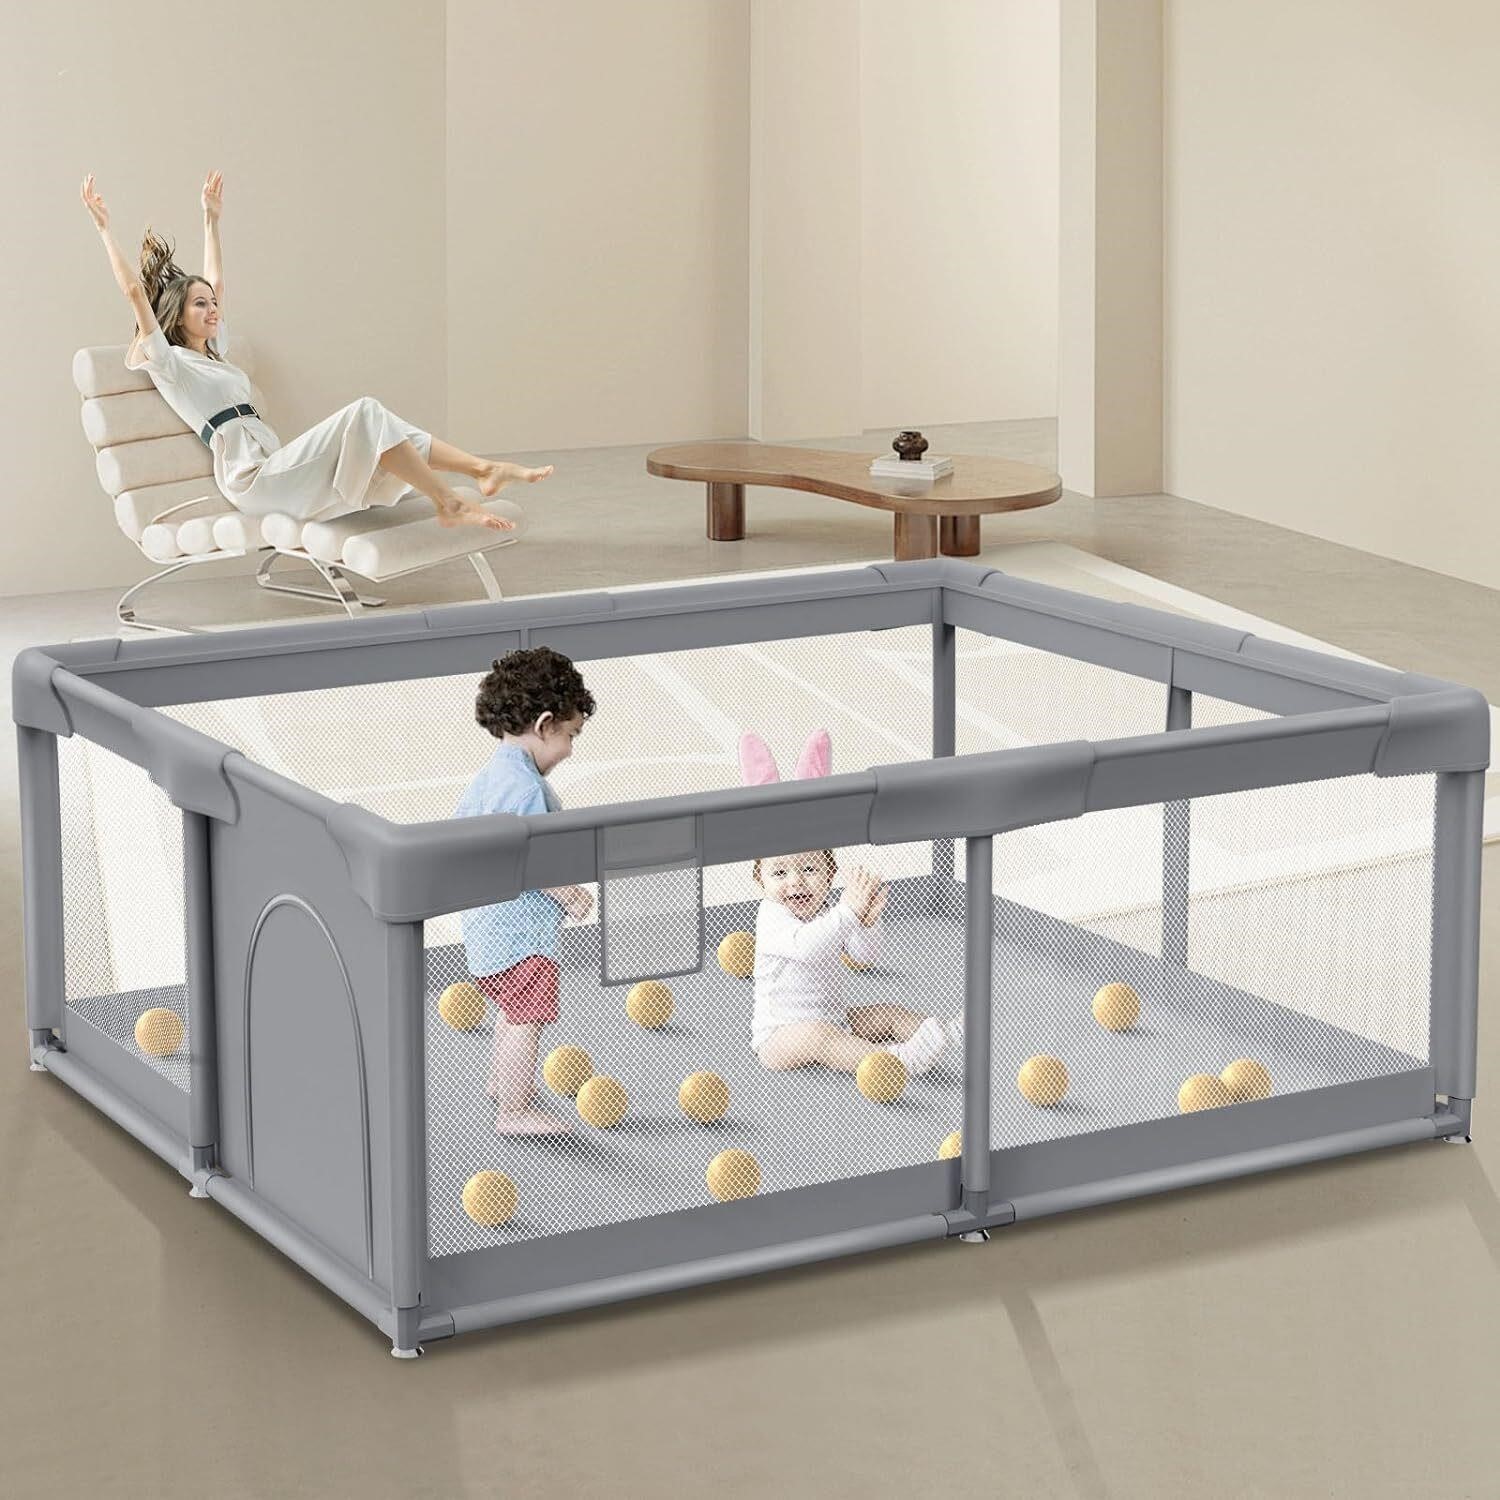 Baby Playpen, Playpen for Babies and Toddlers AZ10